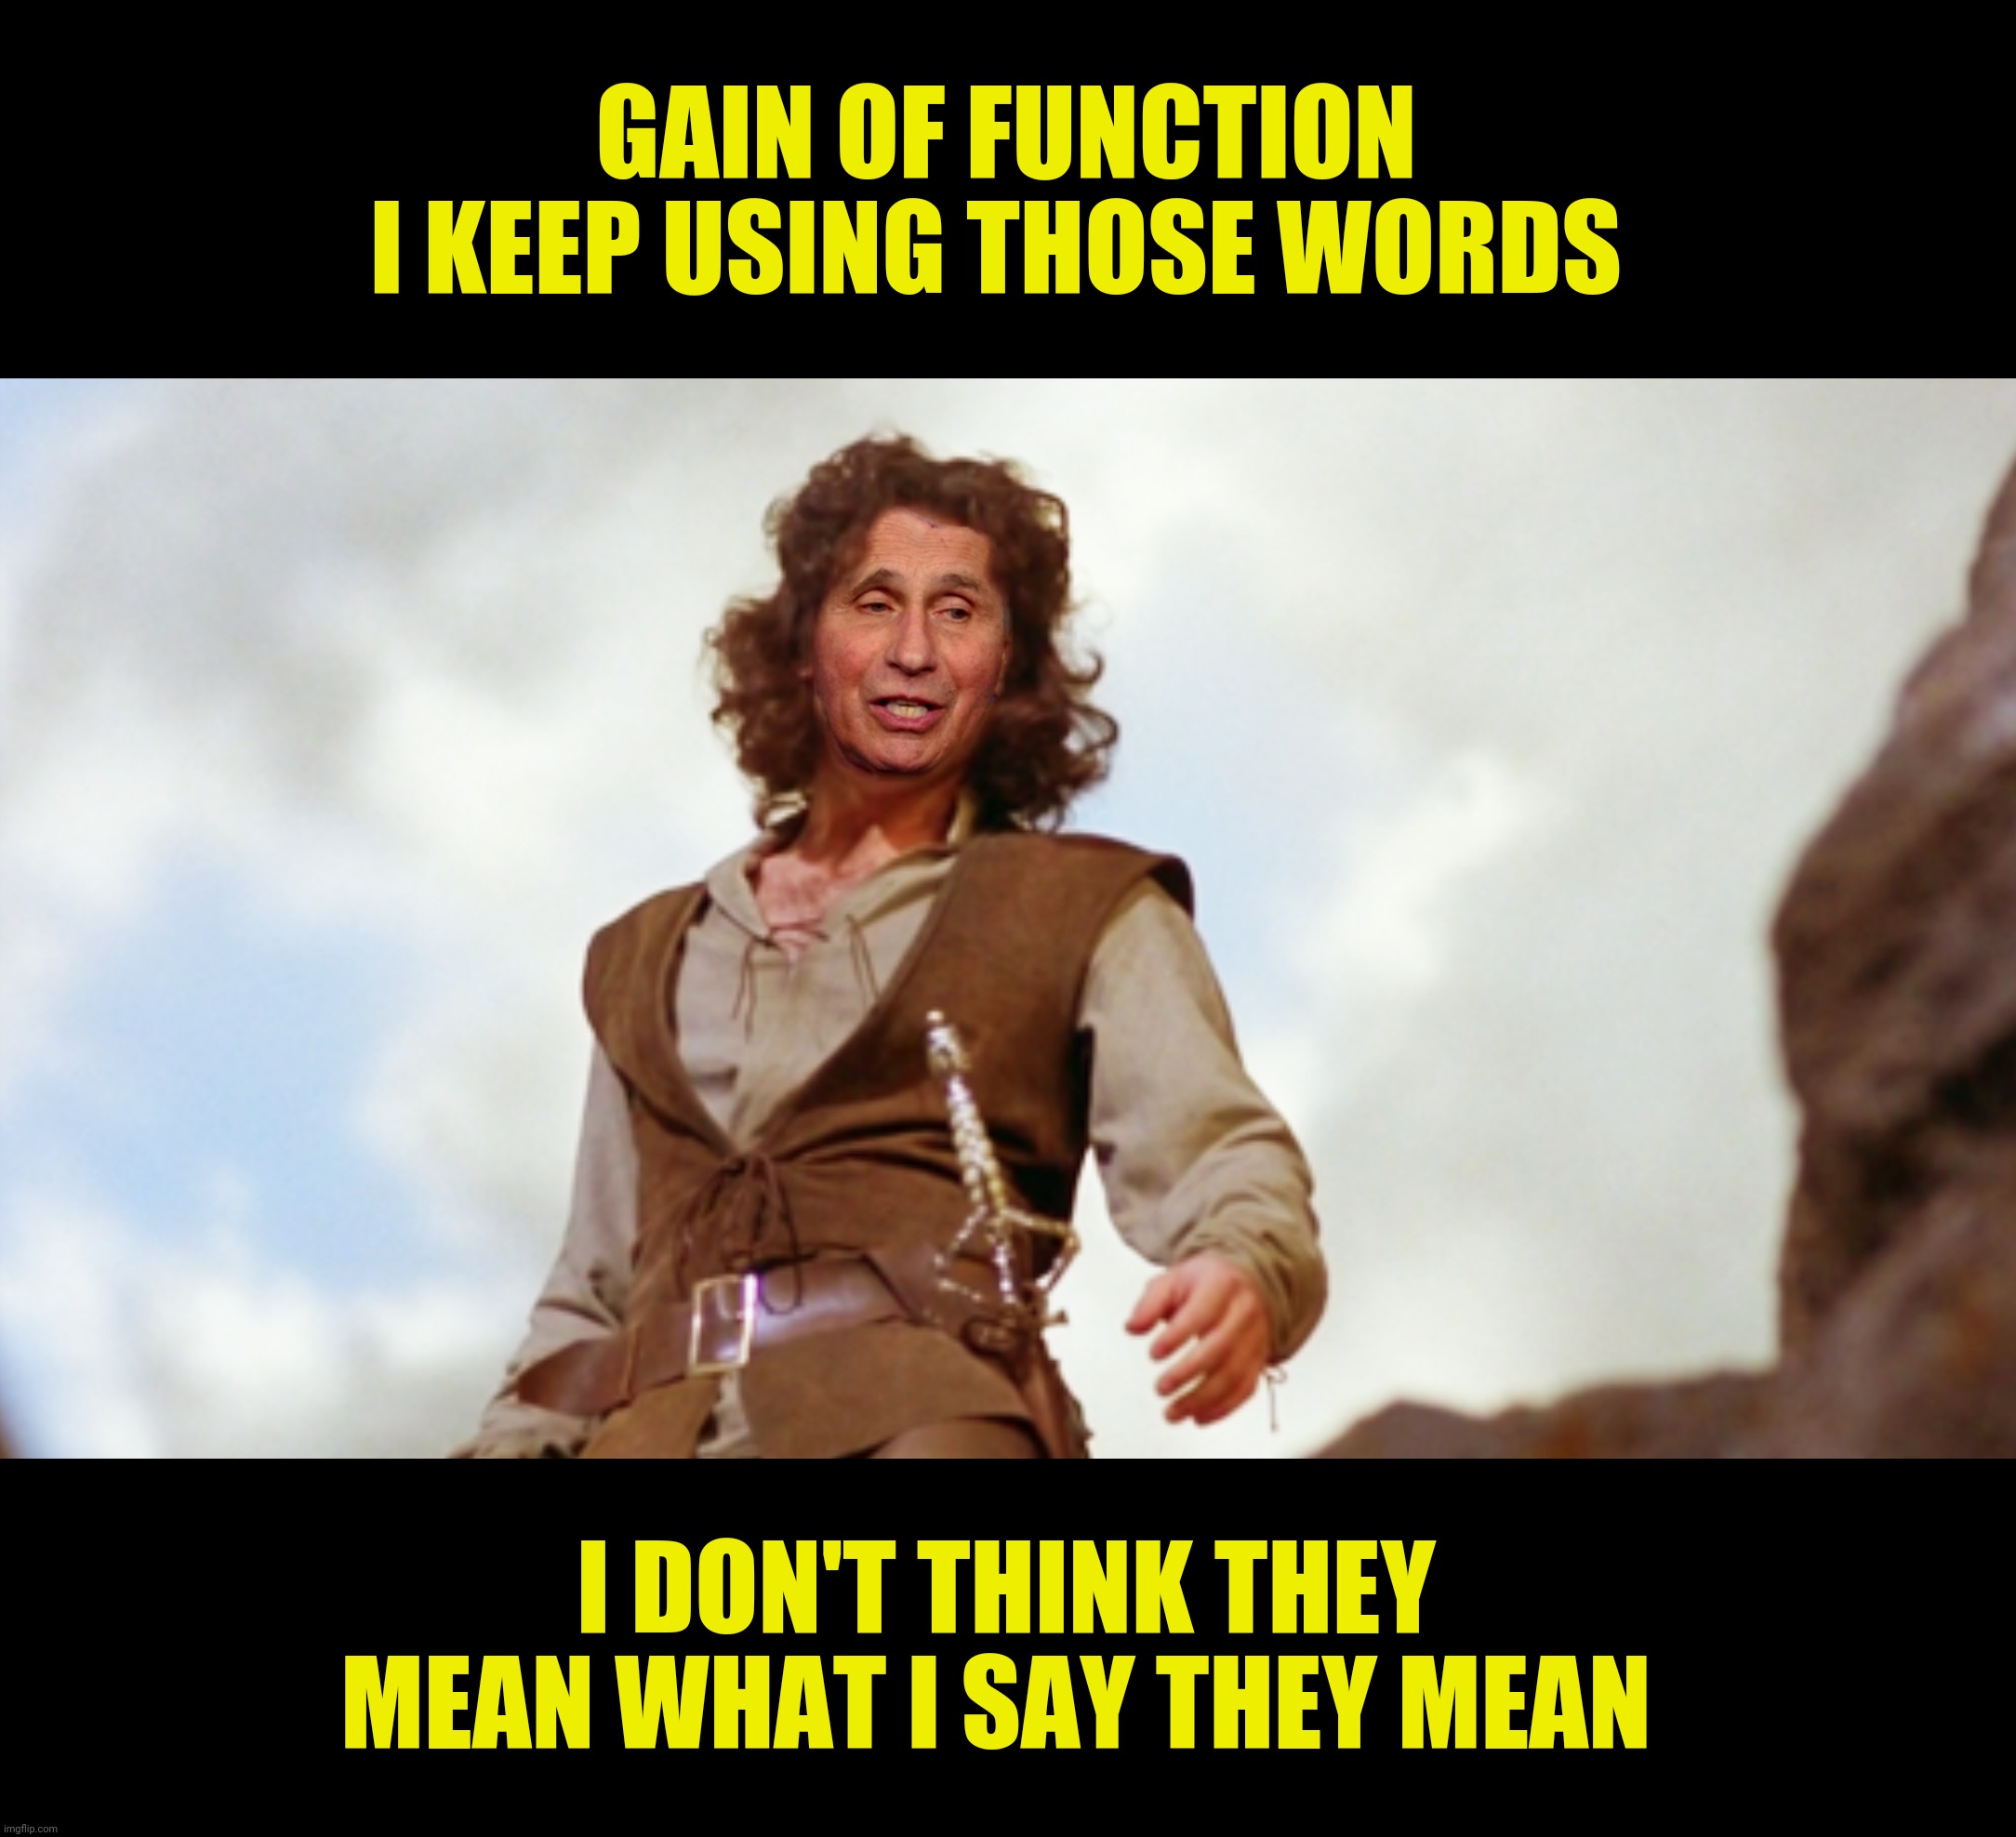 GAIN OF FUNCTION
I KEEP USING THOSE WORDS I DON'T THINK THEY MEAN WHAT I SAY THEY MEAN | made w/ Imgflip meme maker